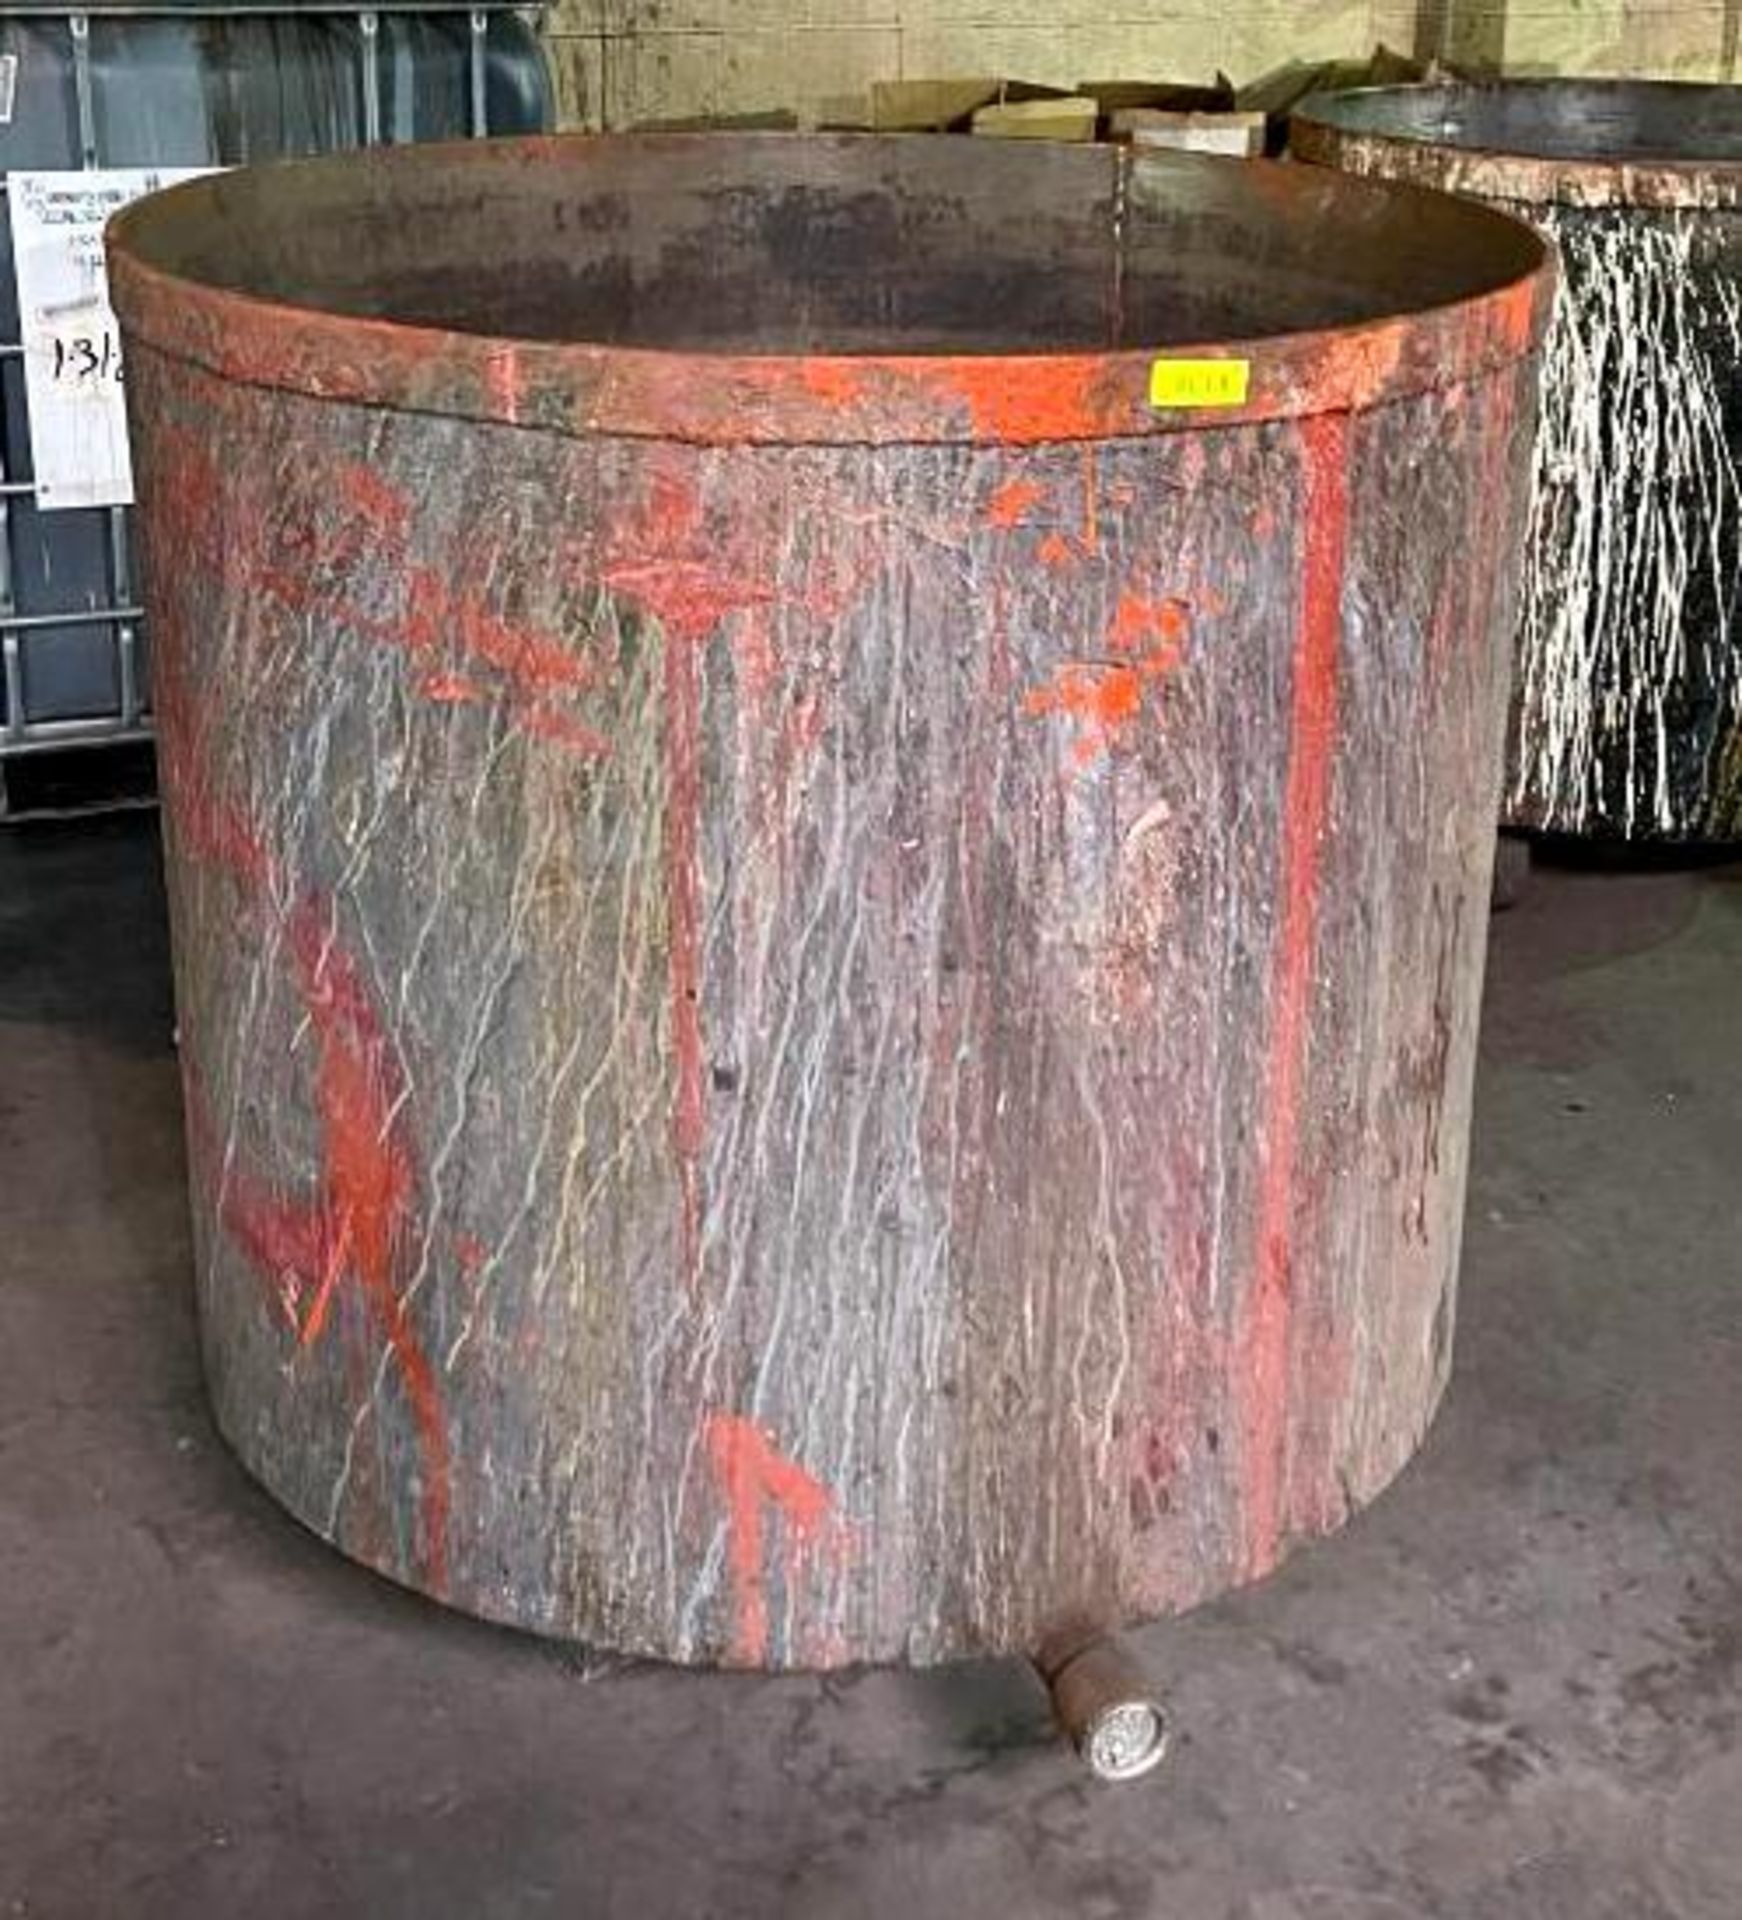 ROUND PROCESS TANK ON CASTERS SIZE: 42"X36"T LOCATION: MIXER ROOM QTY: 1